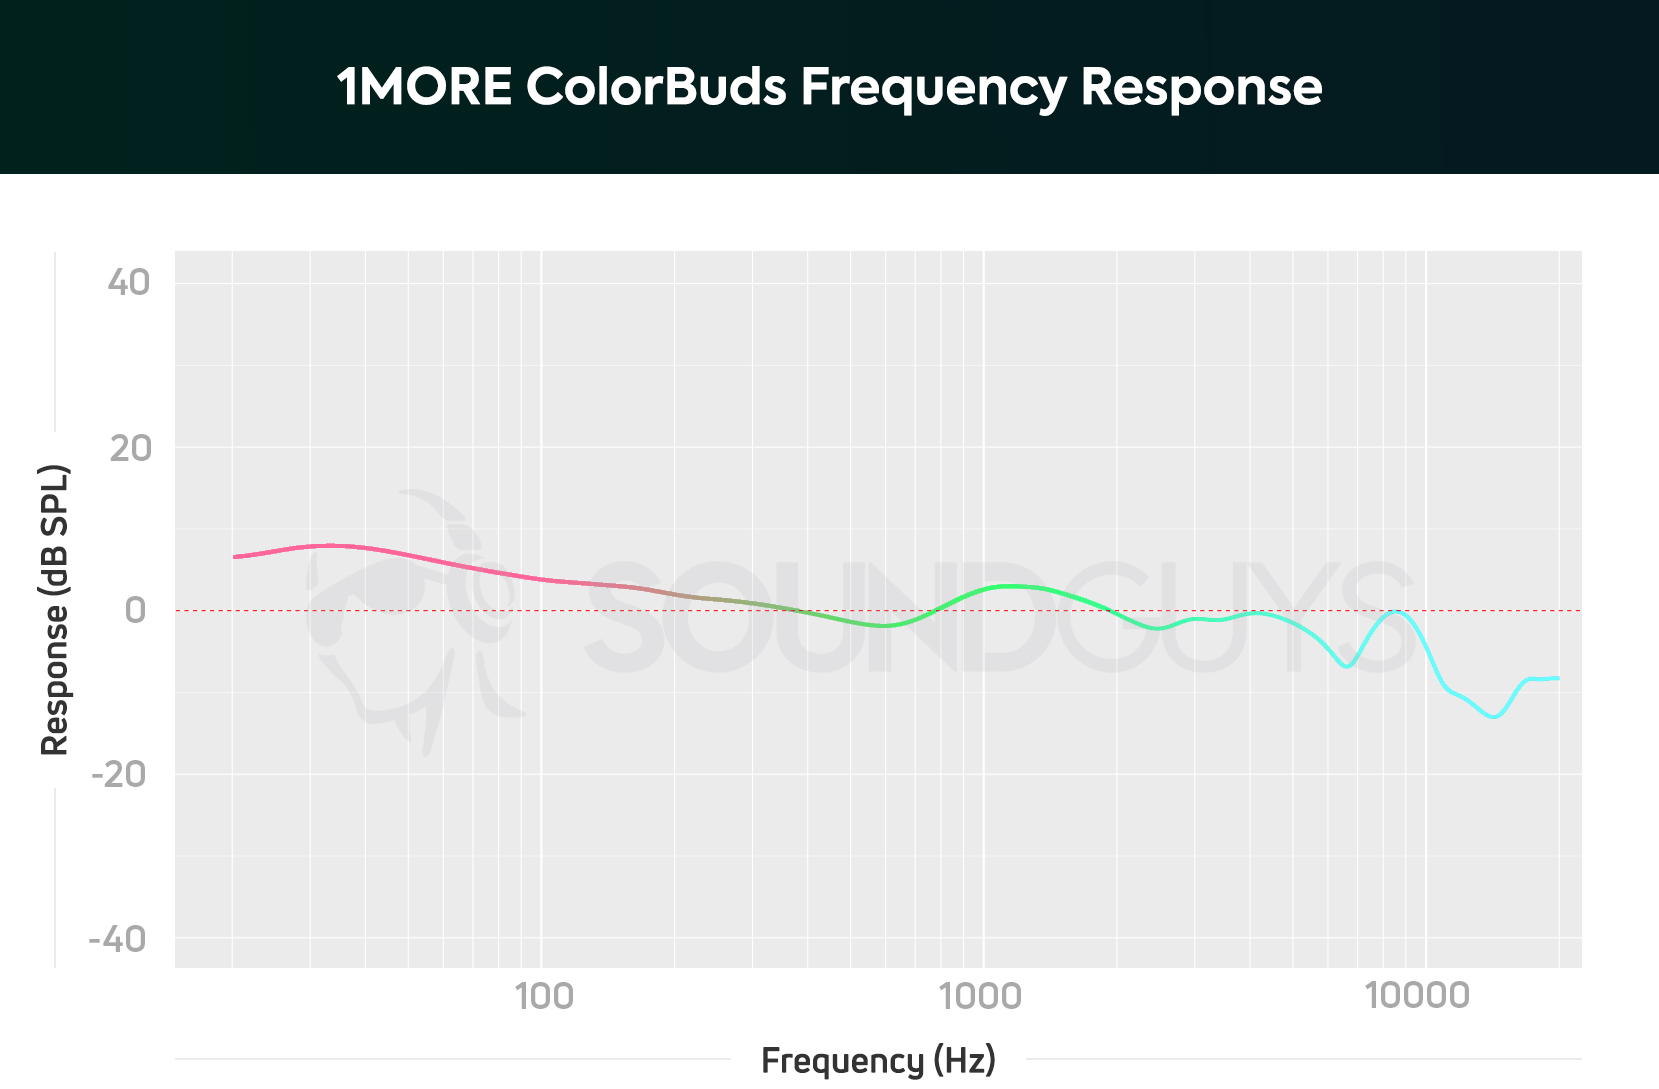 A chart depicting the 1MORE ColorBuds true wireless earbuds frequency response which amplifies bass and sub-bass notes most.